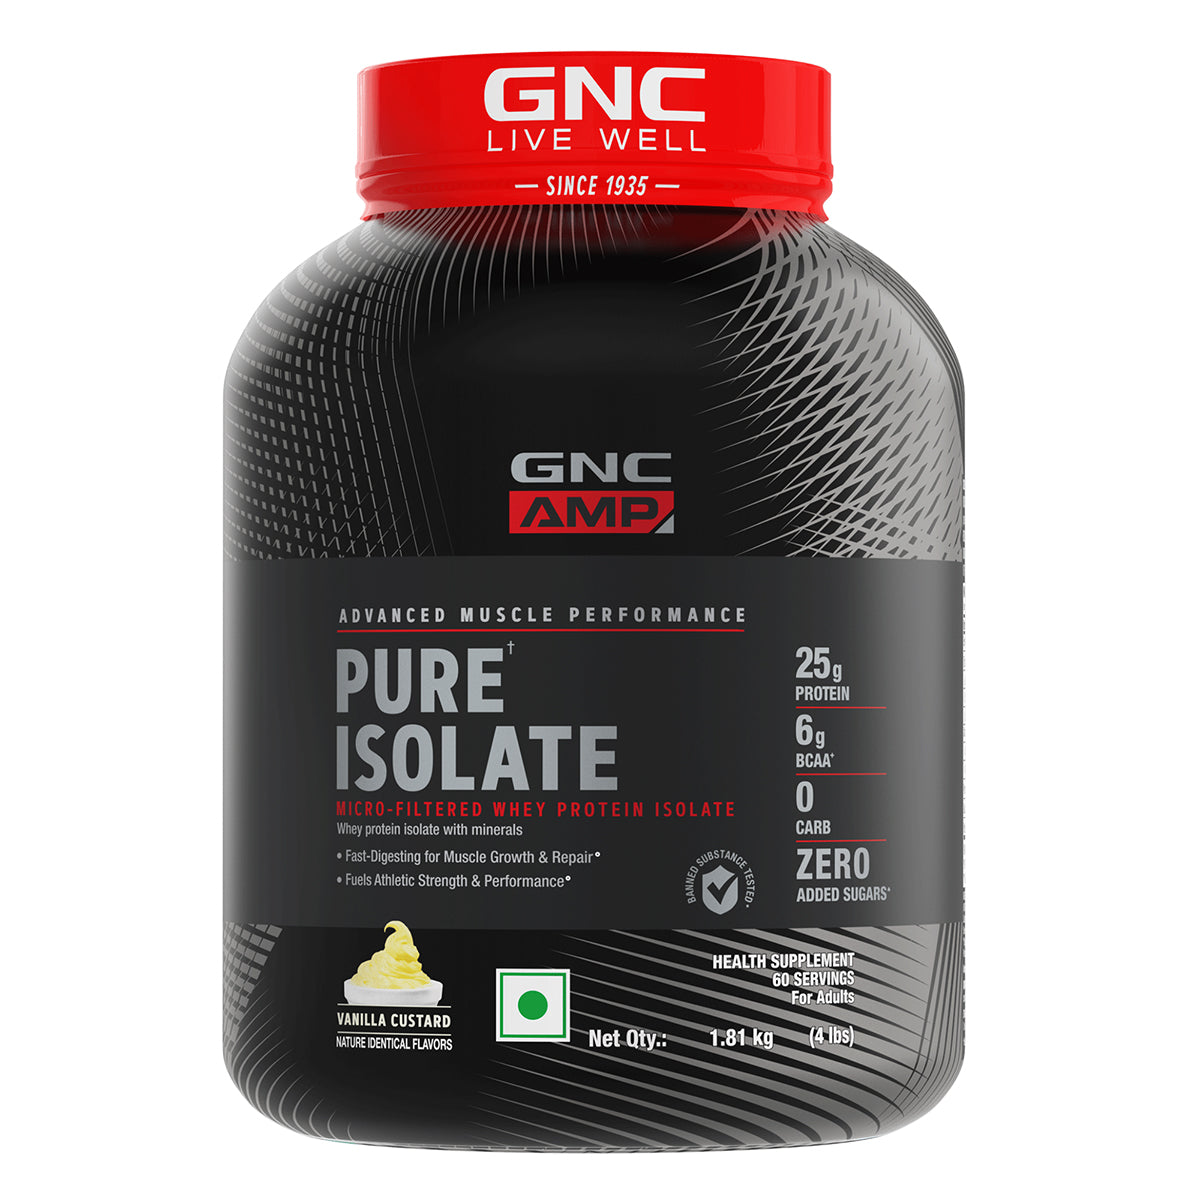 GNC AMP Pure Isolate (Zero Carb) 4 lbs  with Gym Kit - Boosts Athletic & Workout Performance | Increases Muscle Mass